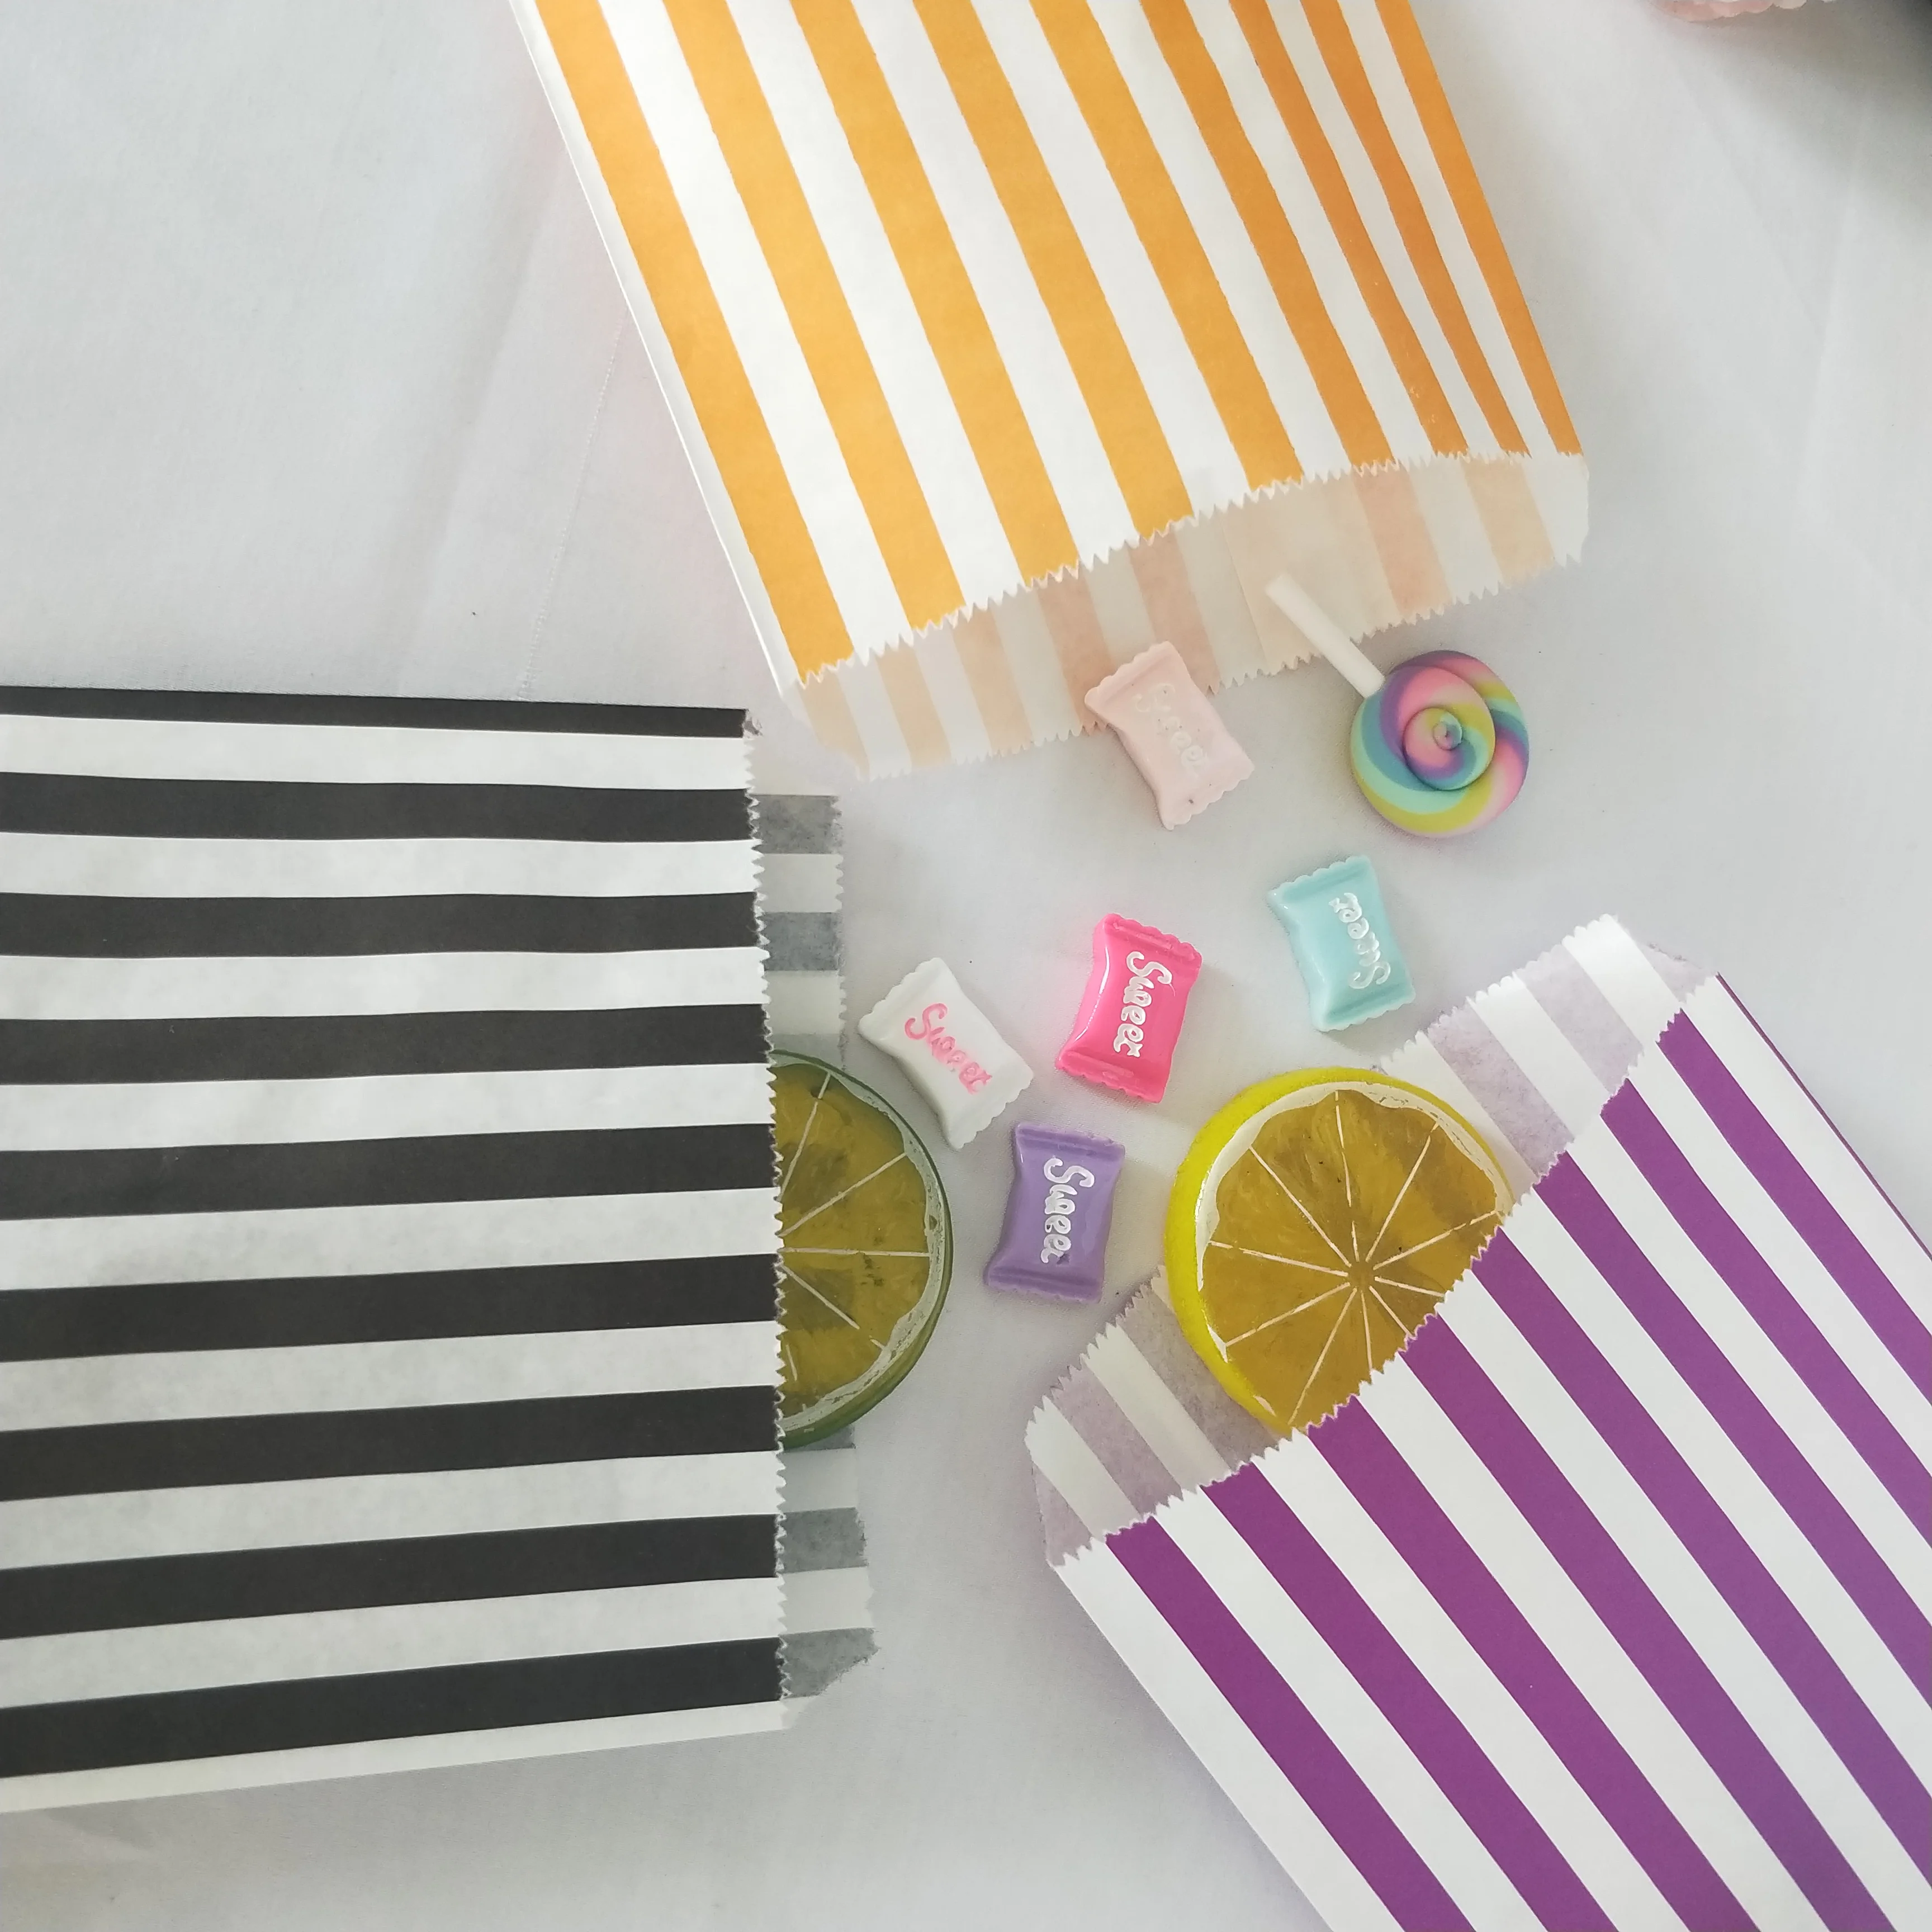 100 AQUA CANDY STRIPE PAPER PARTY GIFT SWEET BAGS 5" x 7" CANDY CART 